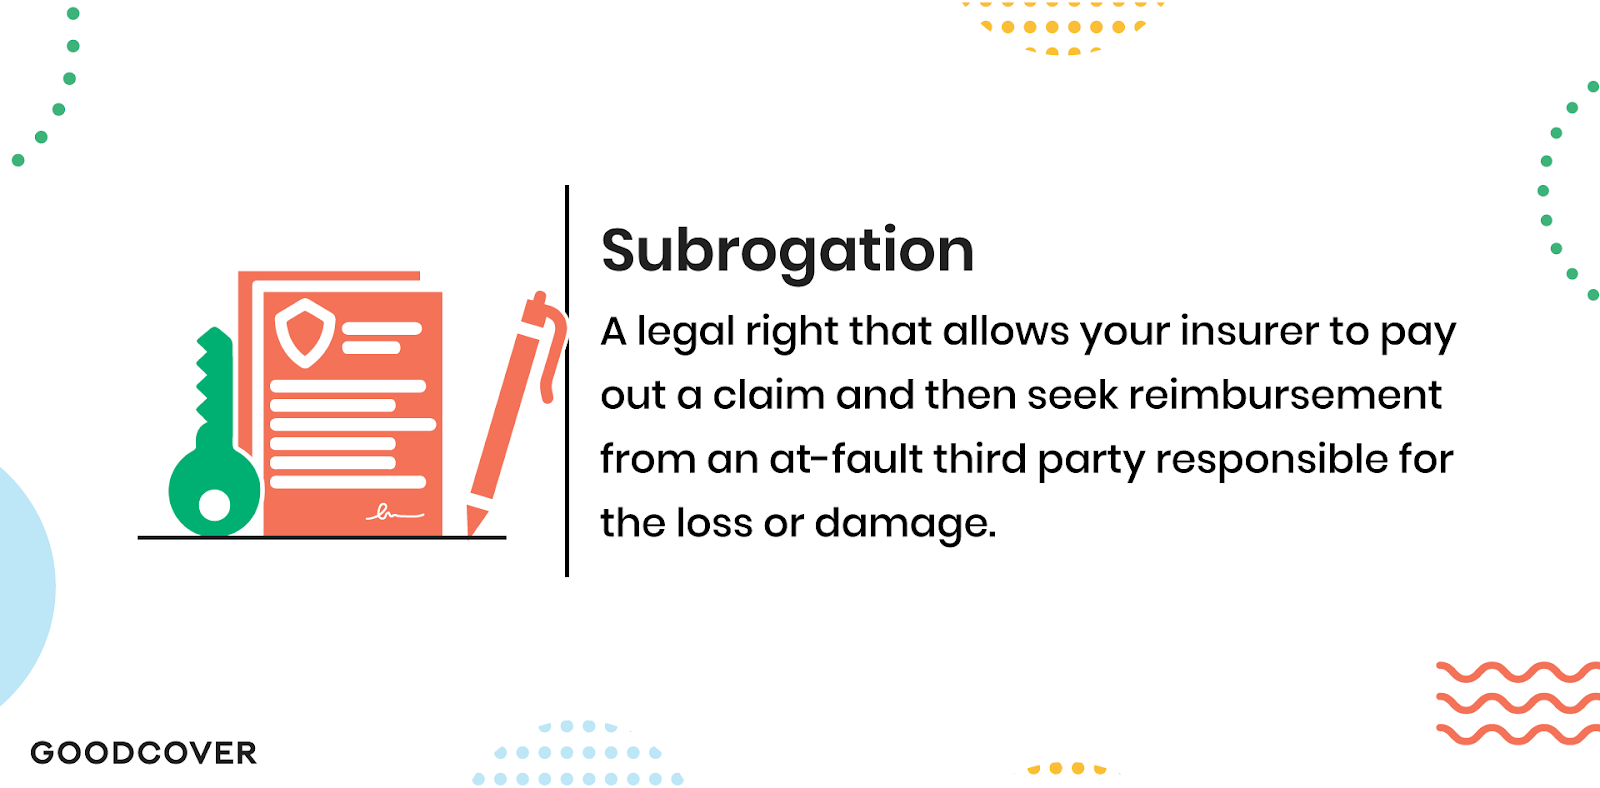 Subrogation definition in insurance.